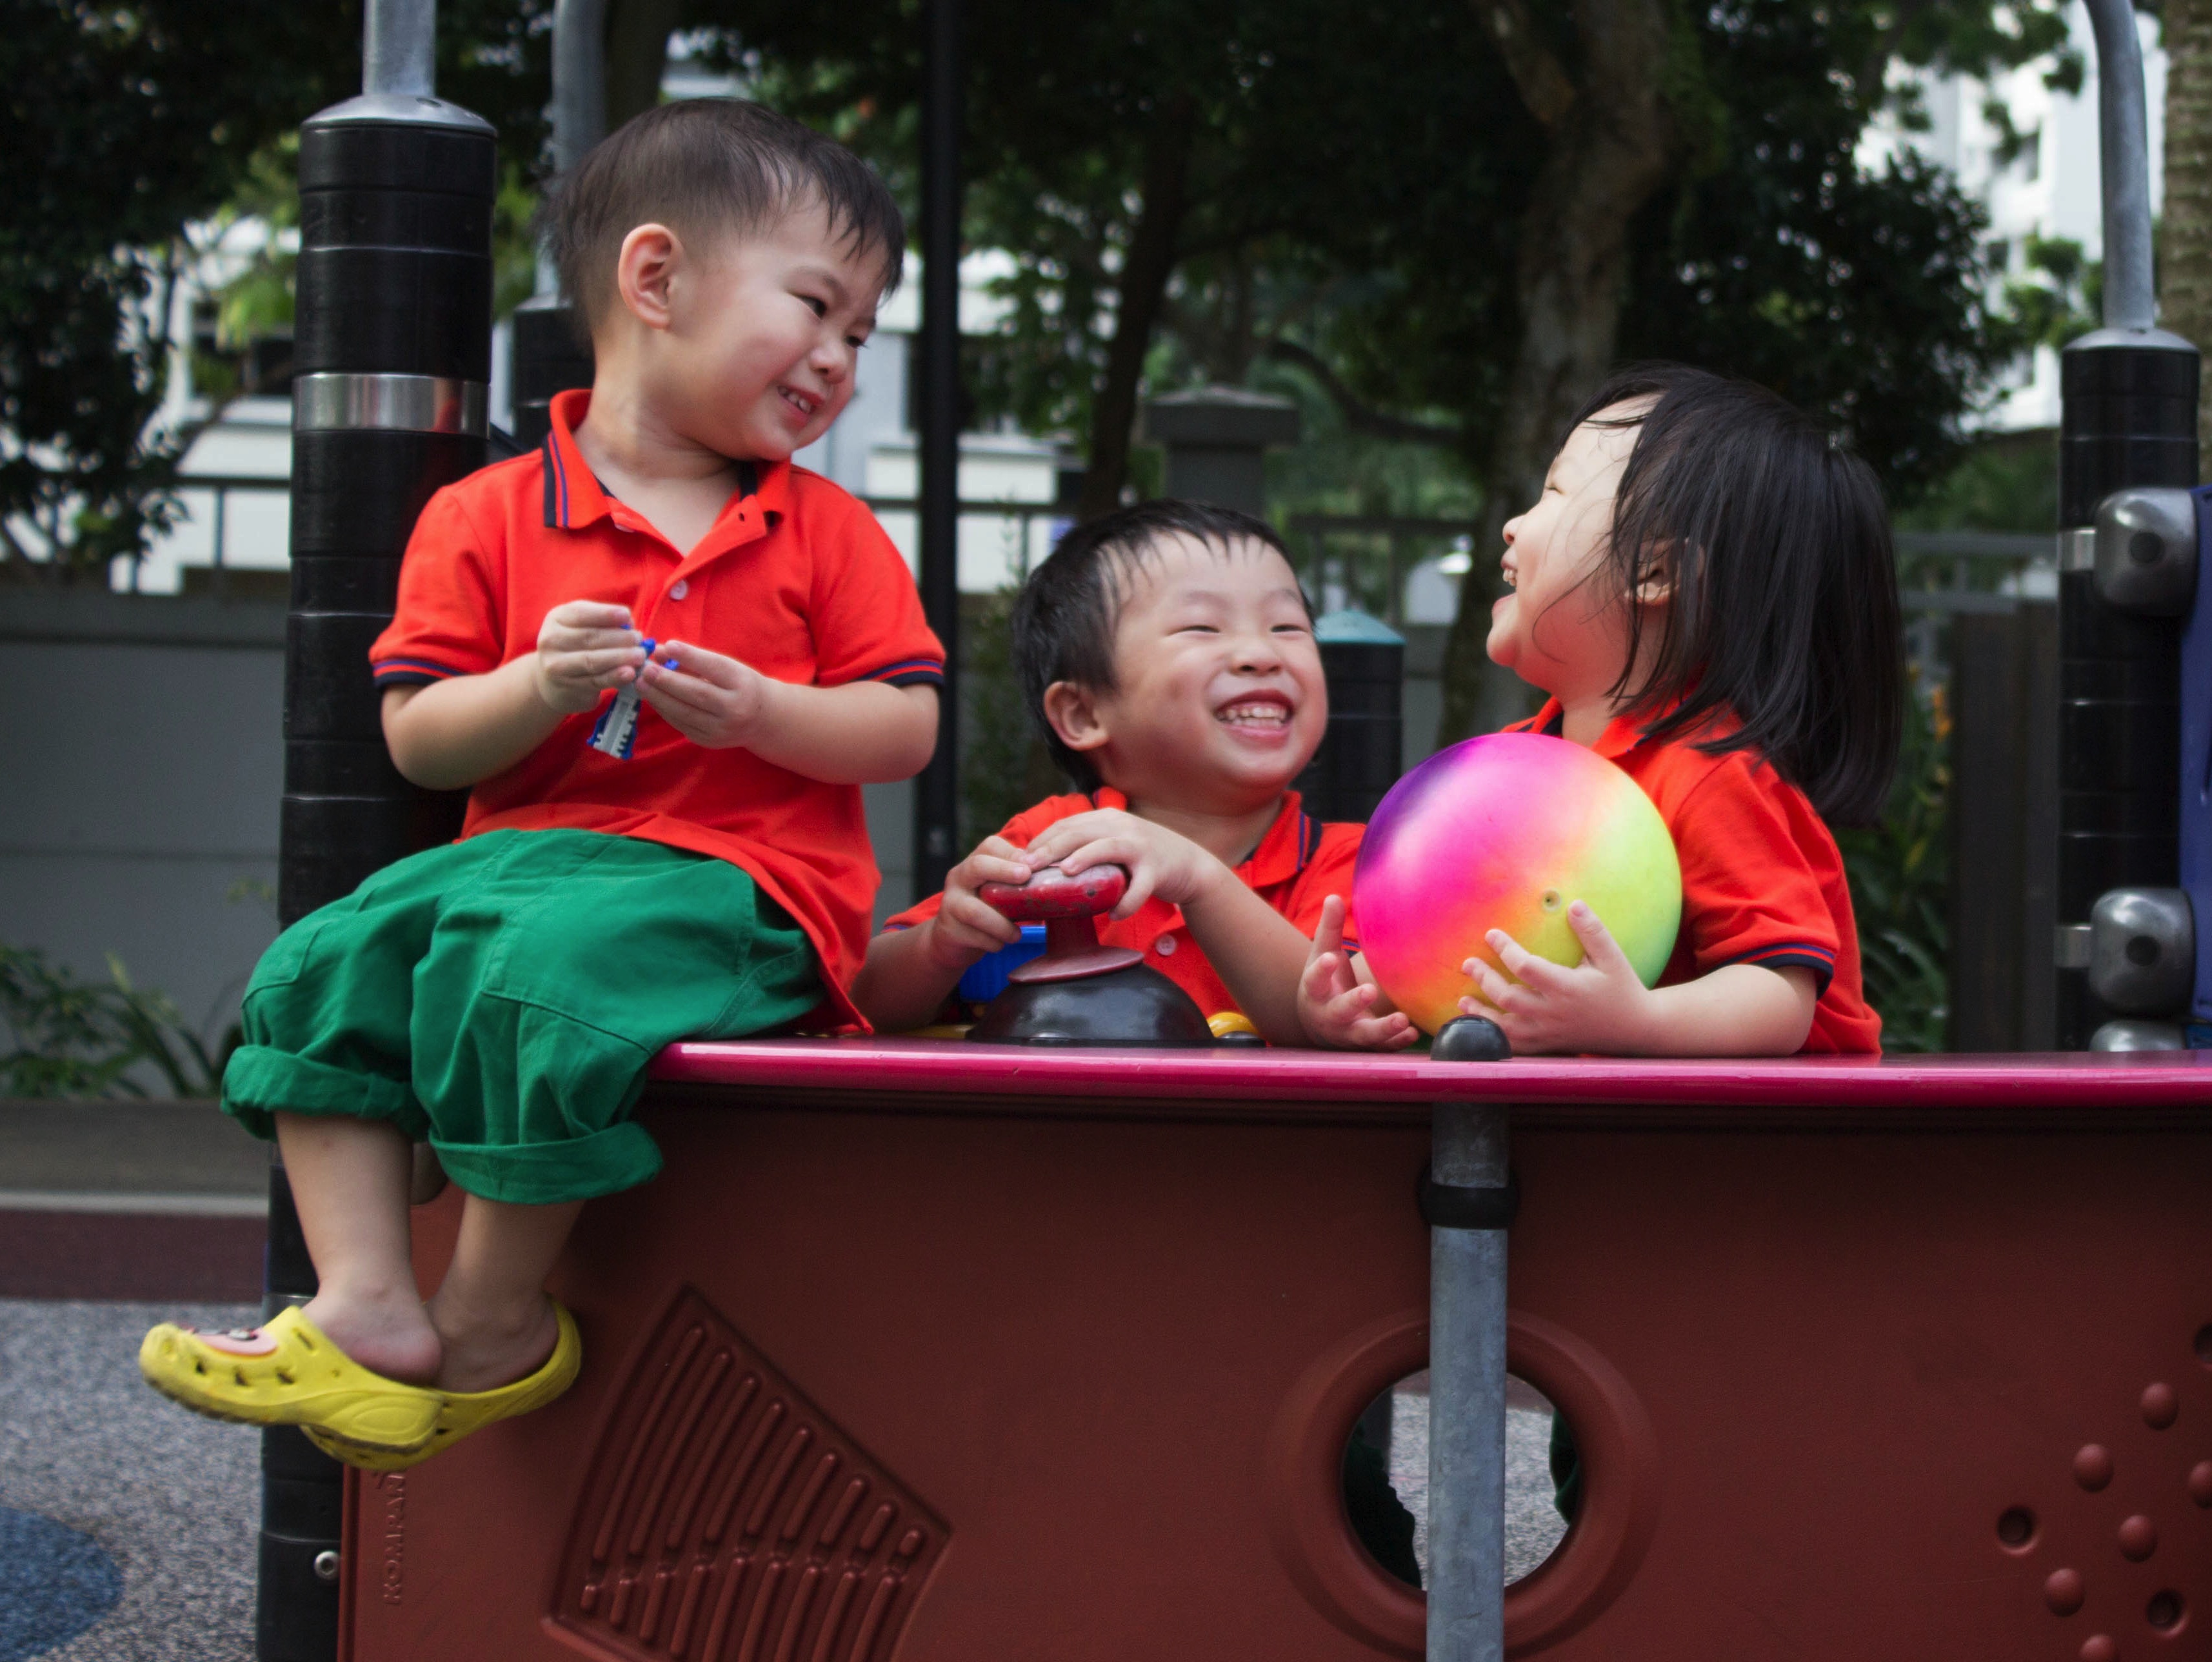 Preschool and Childcare services for children aged 18 months to 6 years old.